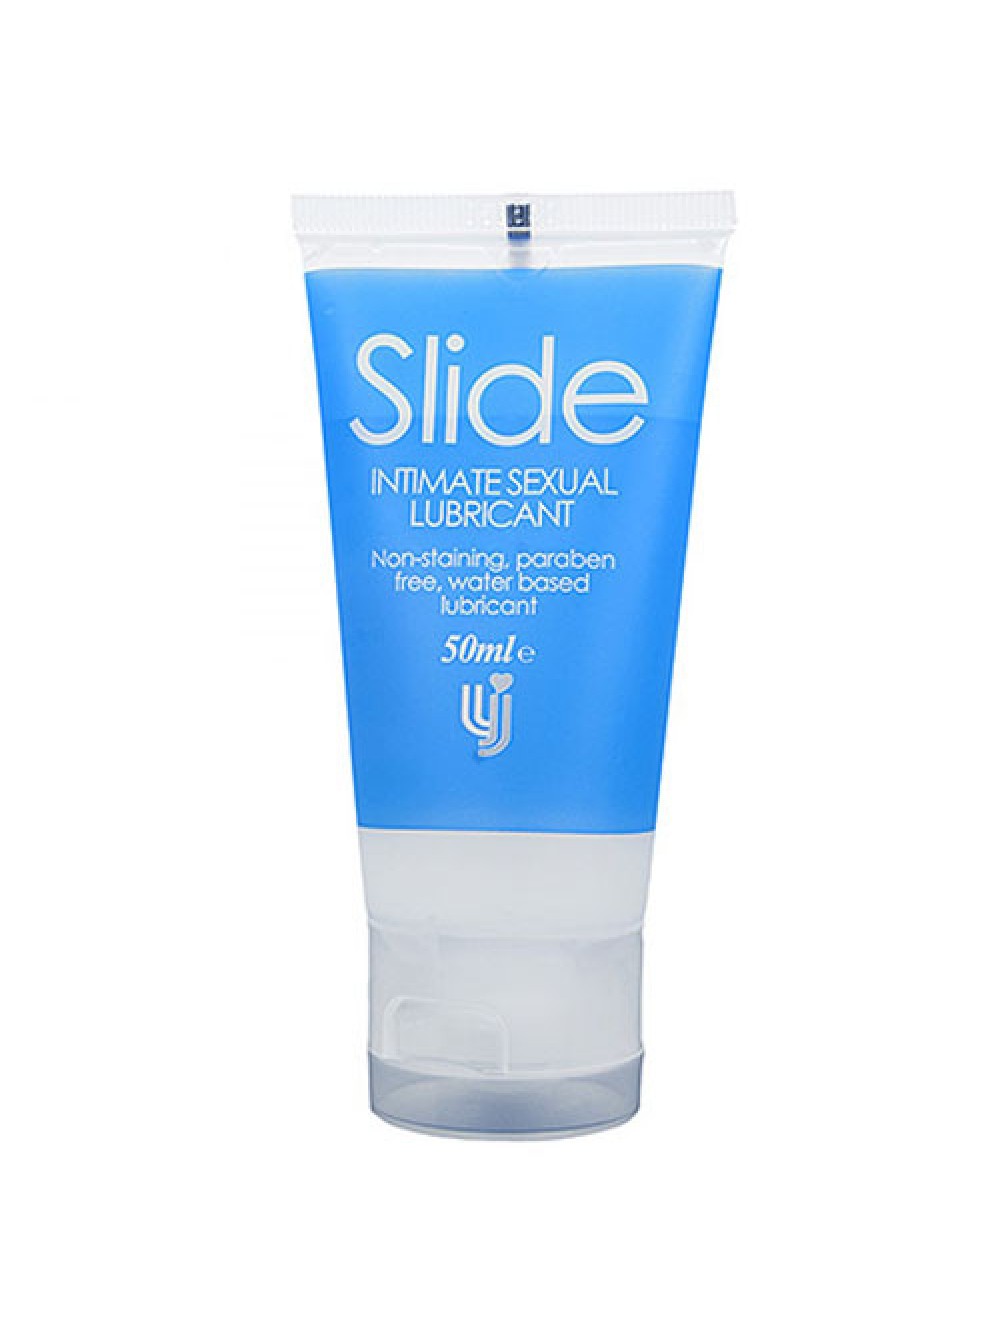 Slide Intimate Sexual Lubricant 50ml 5060211961298